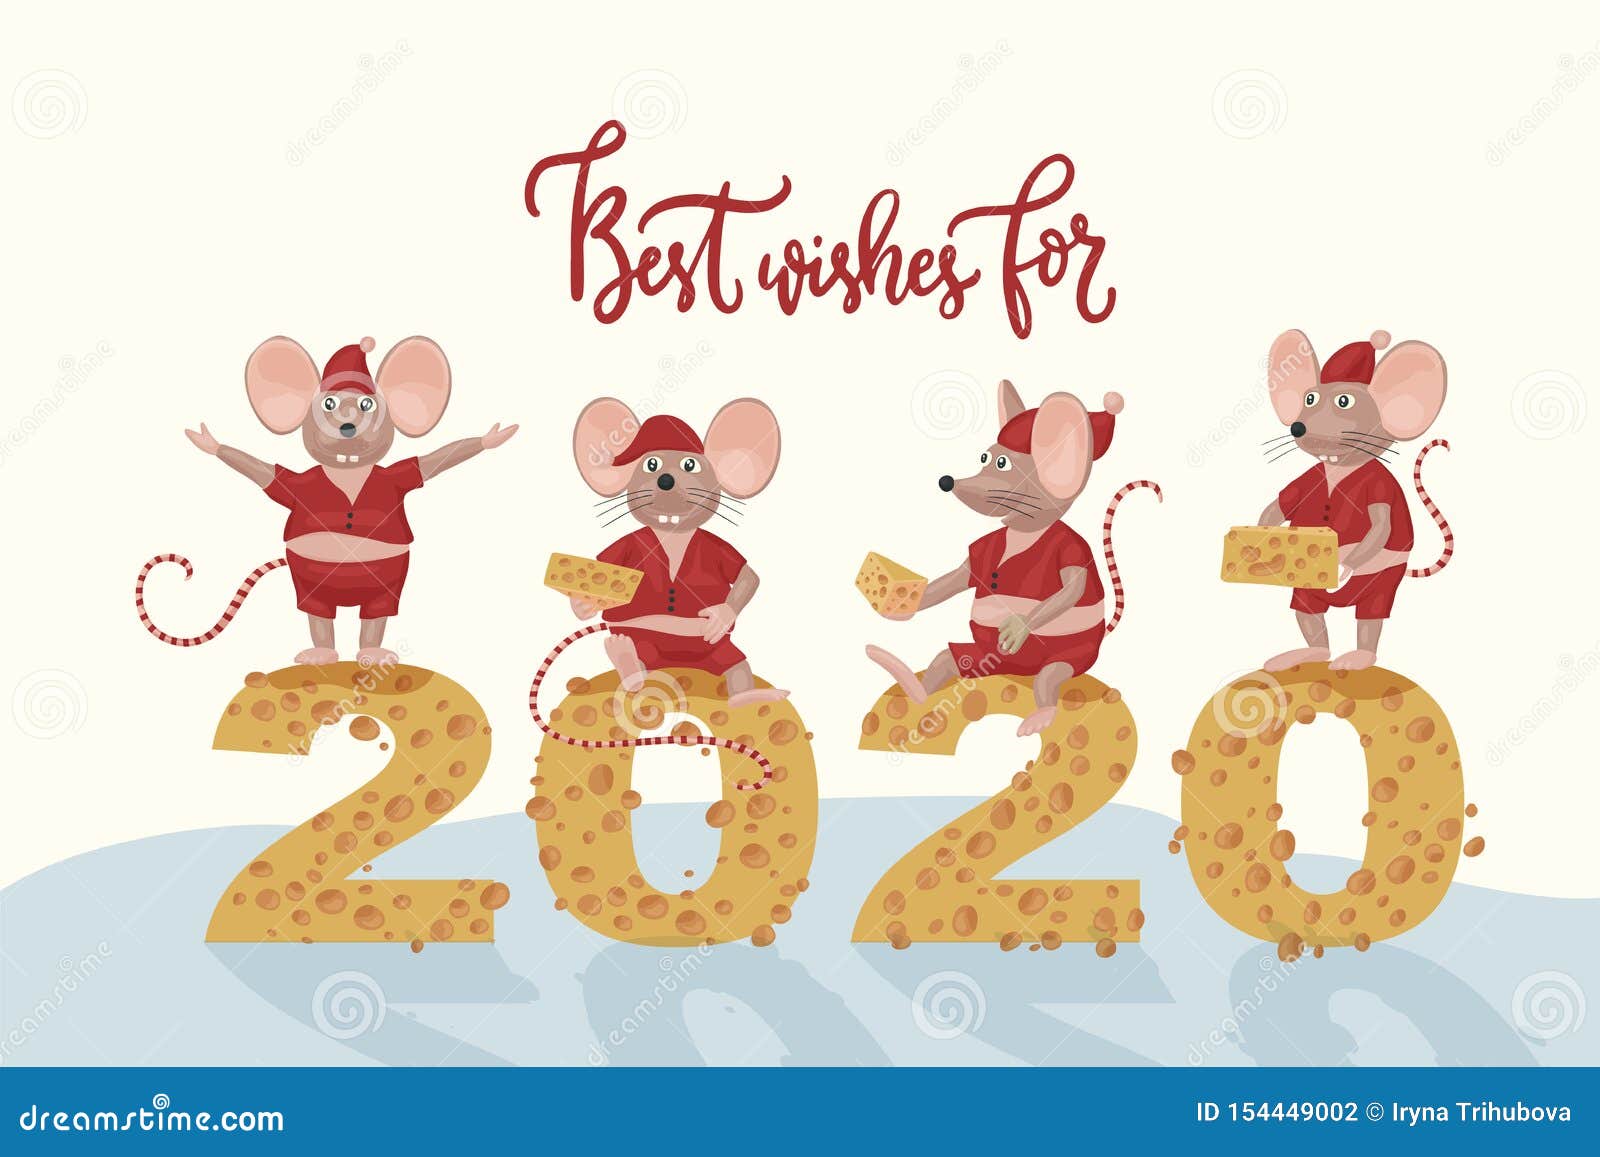 Christmas Vector Mouse. Cartoon Illustration. Stock Vector - Illustration of isolated, 2020 ...